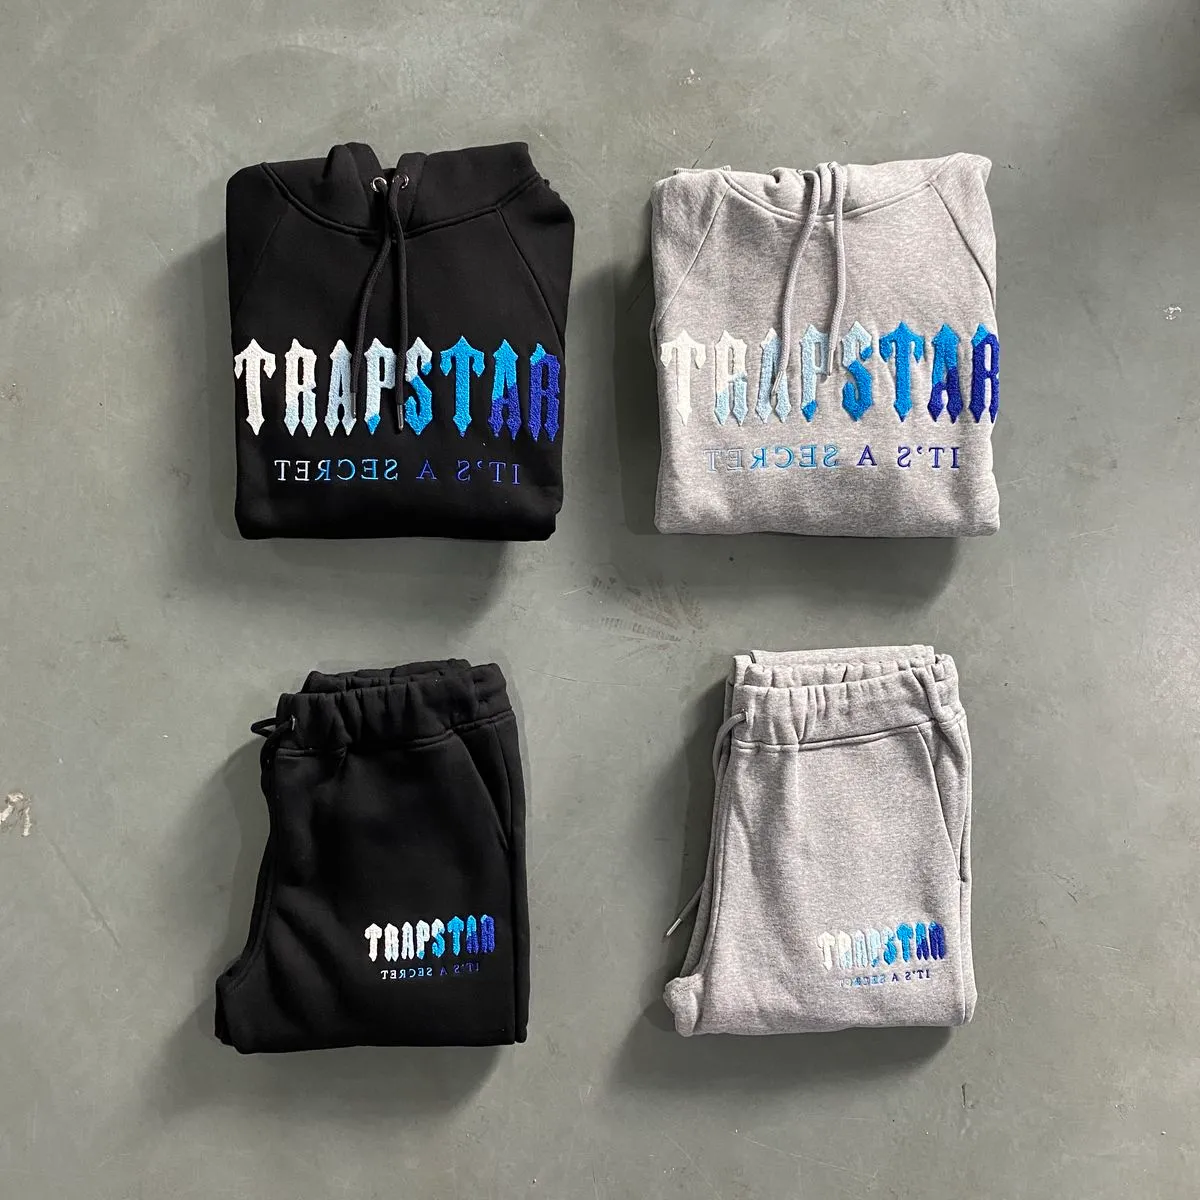 Men's Tracksuits 23ss Men Designer Trapstar Activewear Hoodie Chenille Set Ice Flavours 2.0 Edition 1to1 Top Quality Embroidered Size Xs xxl